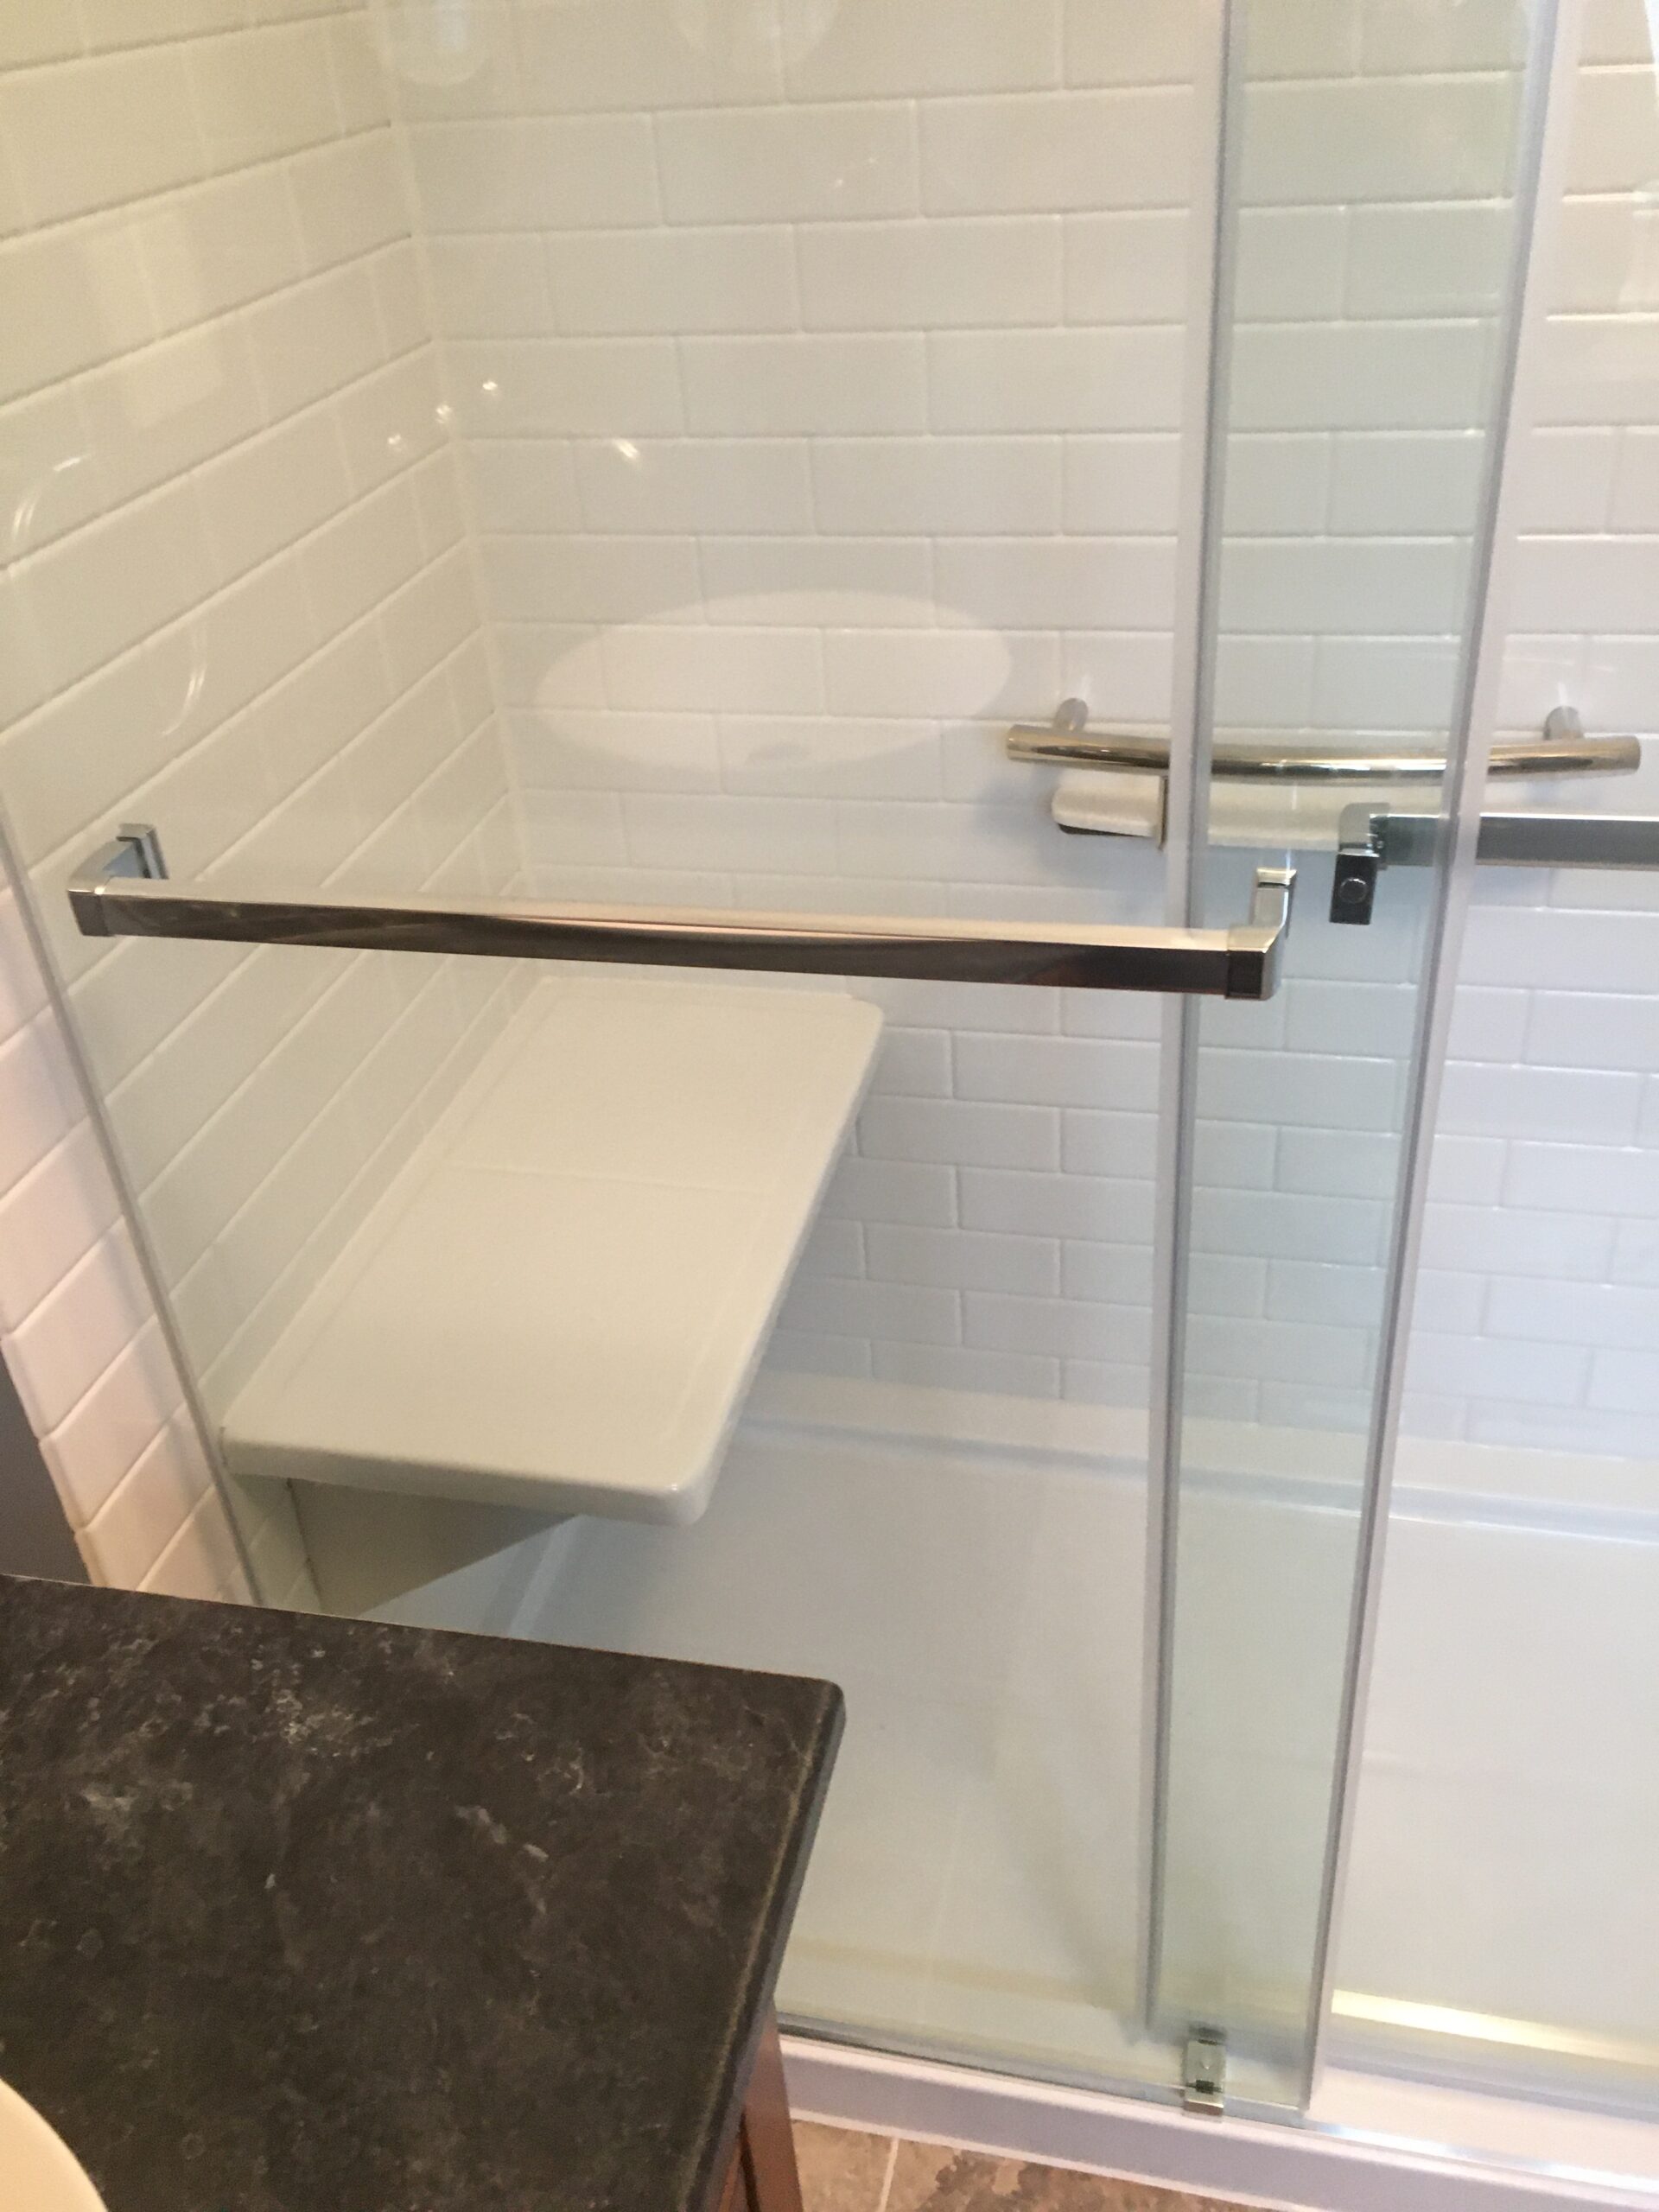 Built-in shower seat in an acrylic shower mimicking subway tile after remodeling.